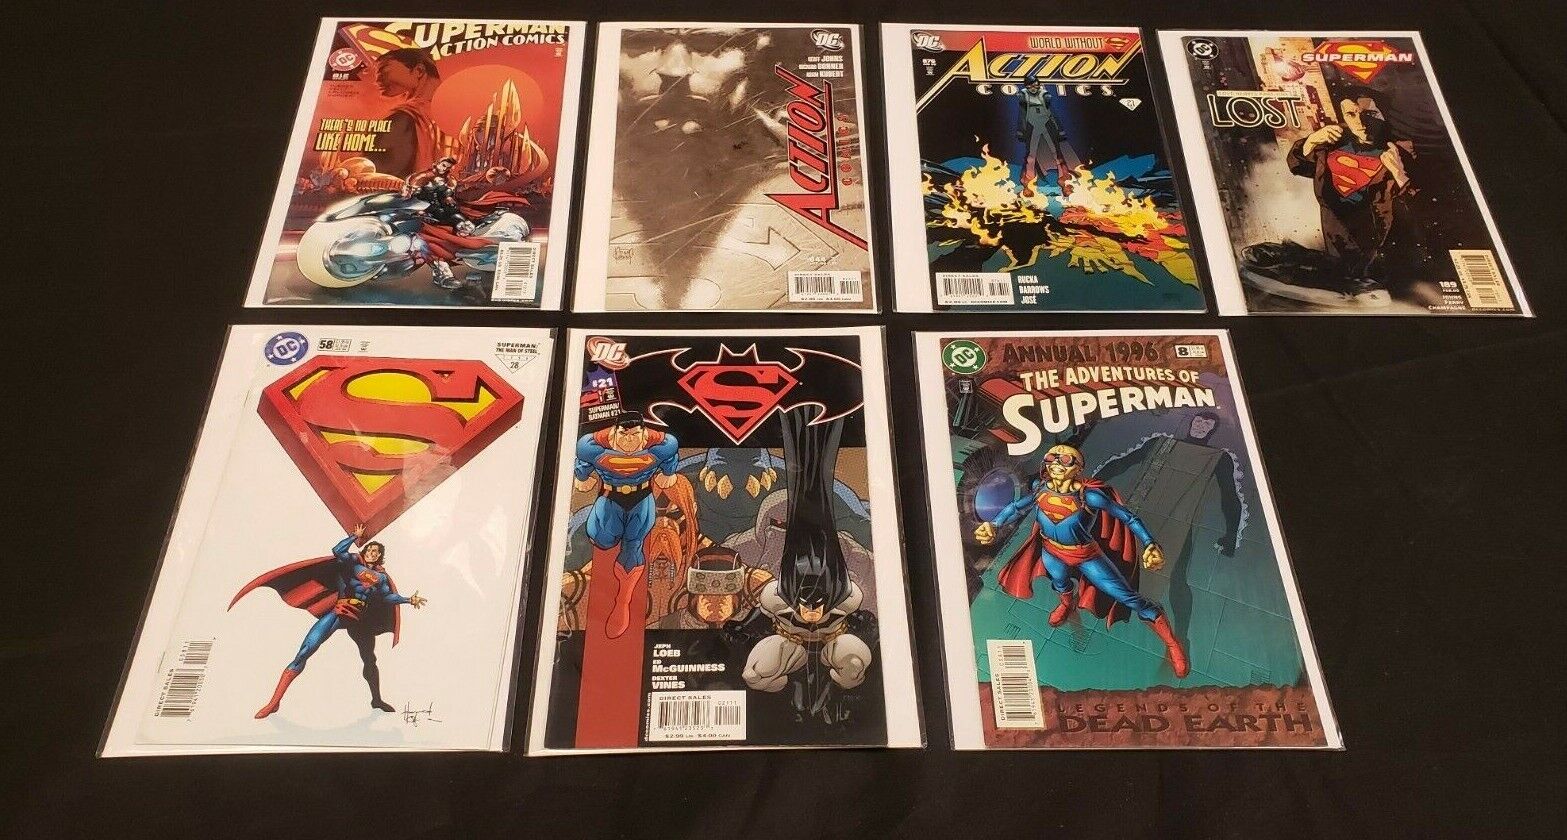 SUPERMAN 7PC (VF/NM) BAGGED & BOARDED, IDENITTY CRISIS III: SNARES 1996-2009